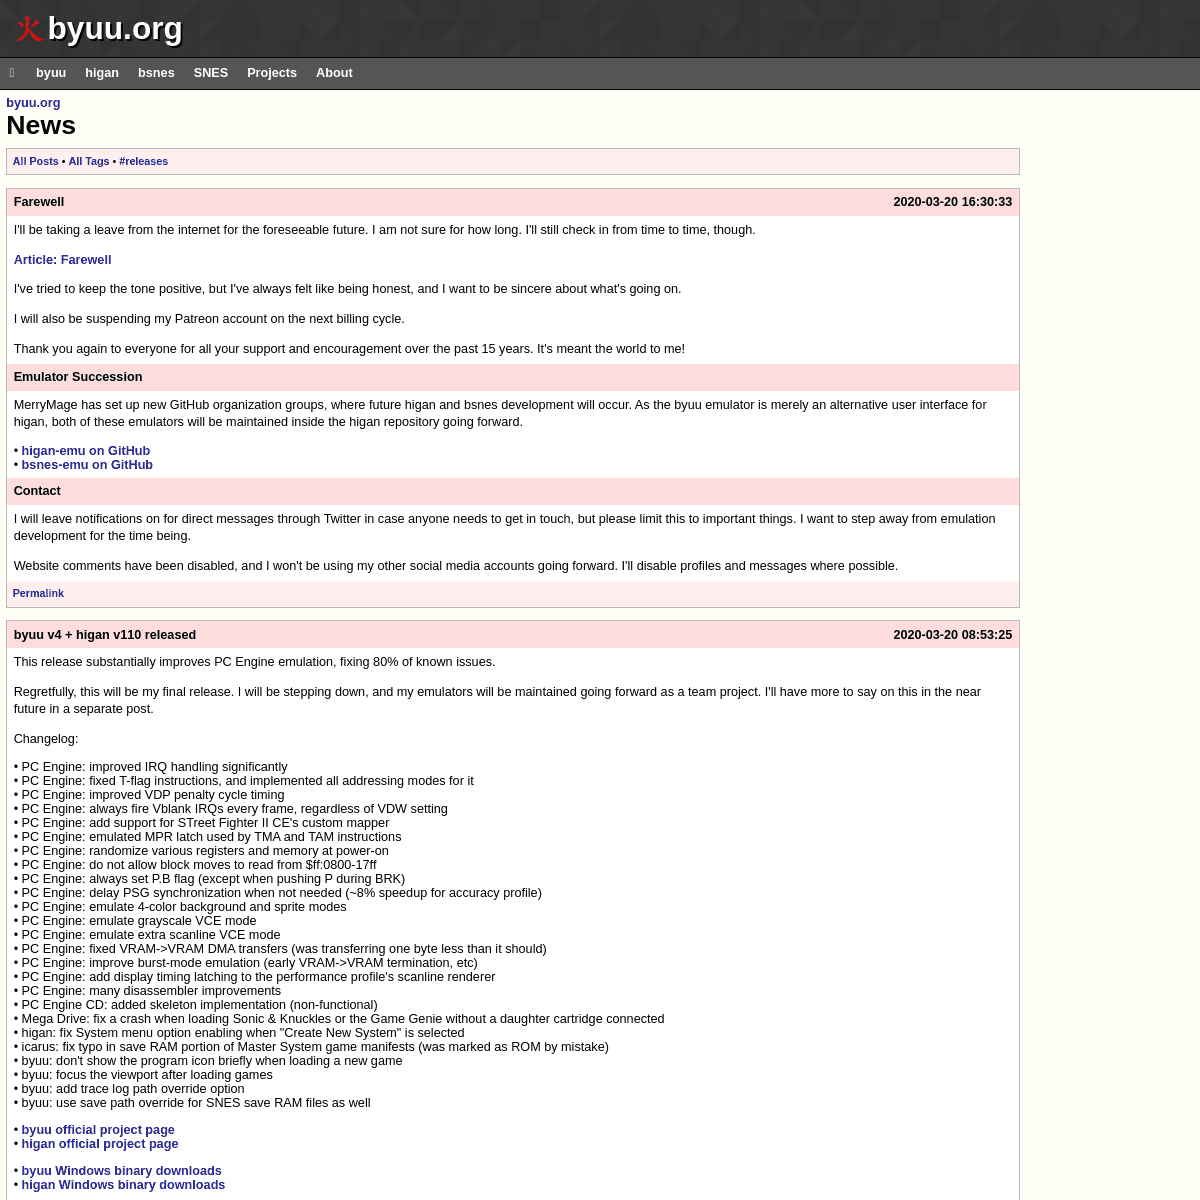 A complete backup of byuu.org